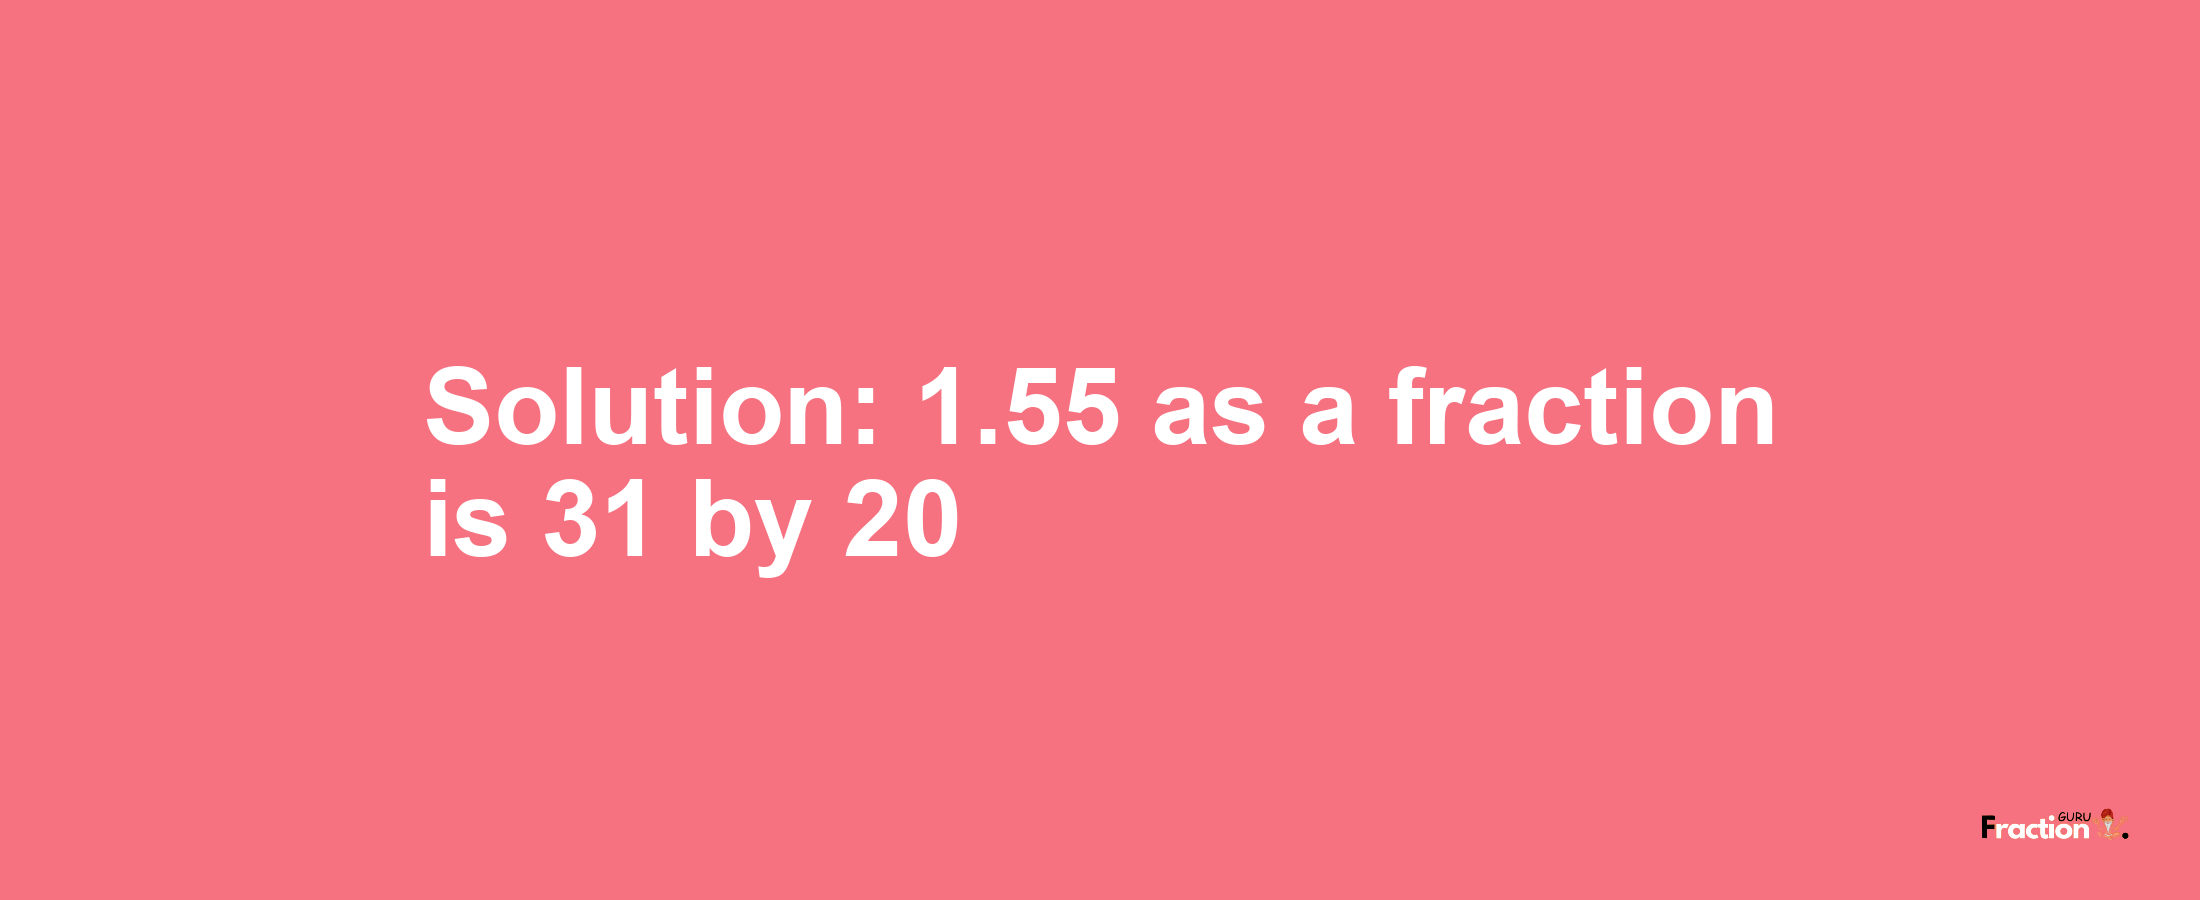 Solution:1.55 as a fraction is 31/20